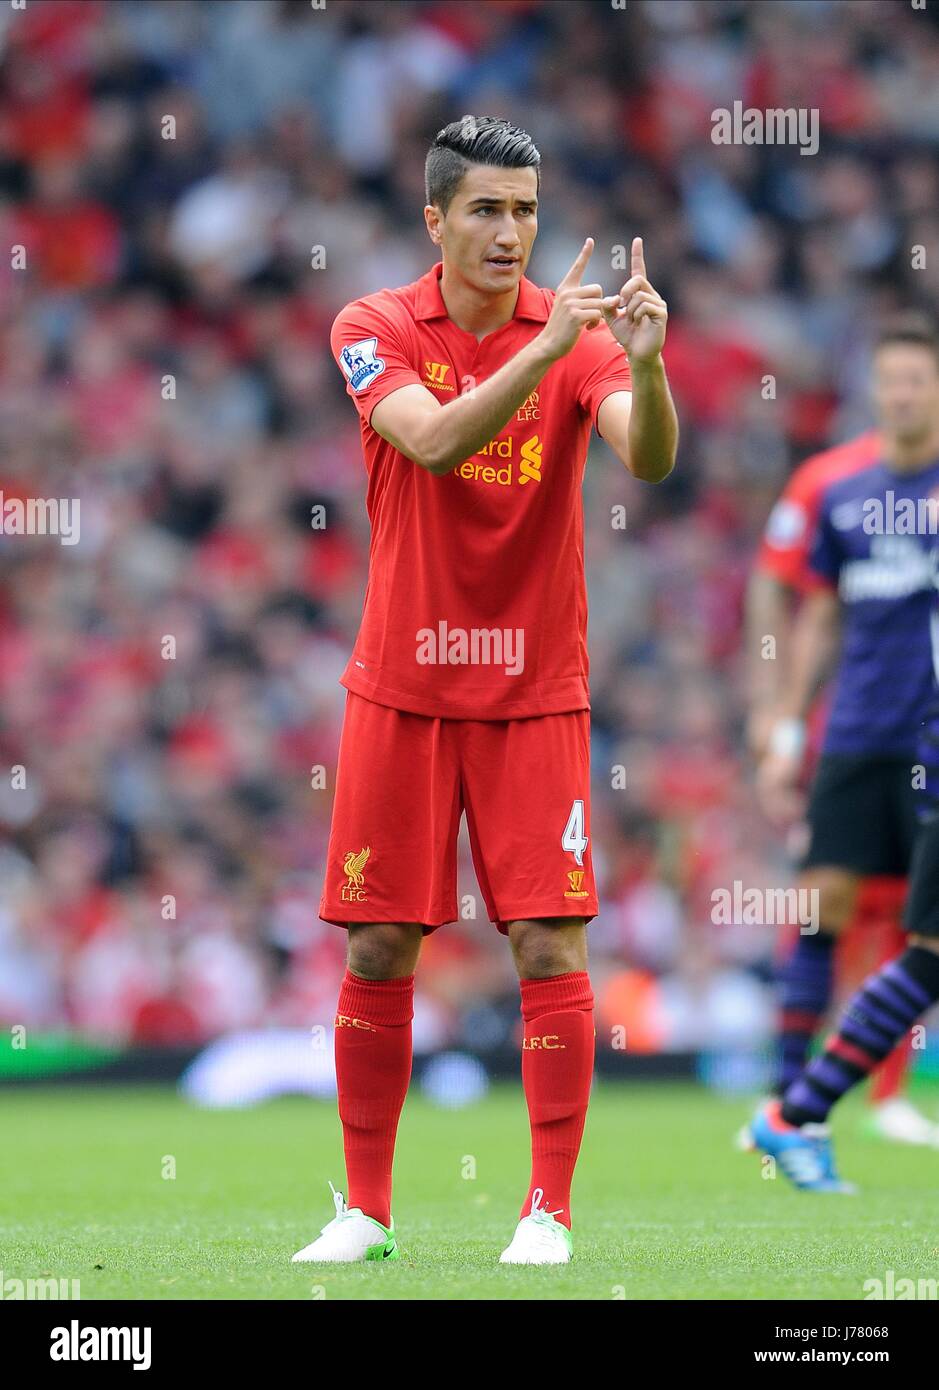 NURI SAHIN FC LIVERPOOL ANFIELD LIVERPOOL ANGLETERRE 02 Septembre 2012 Banque D'Images